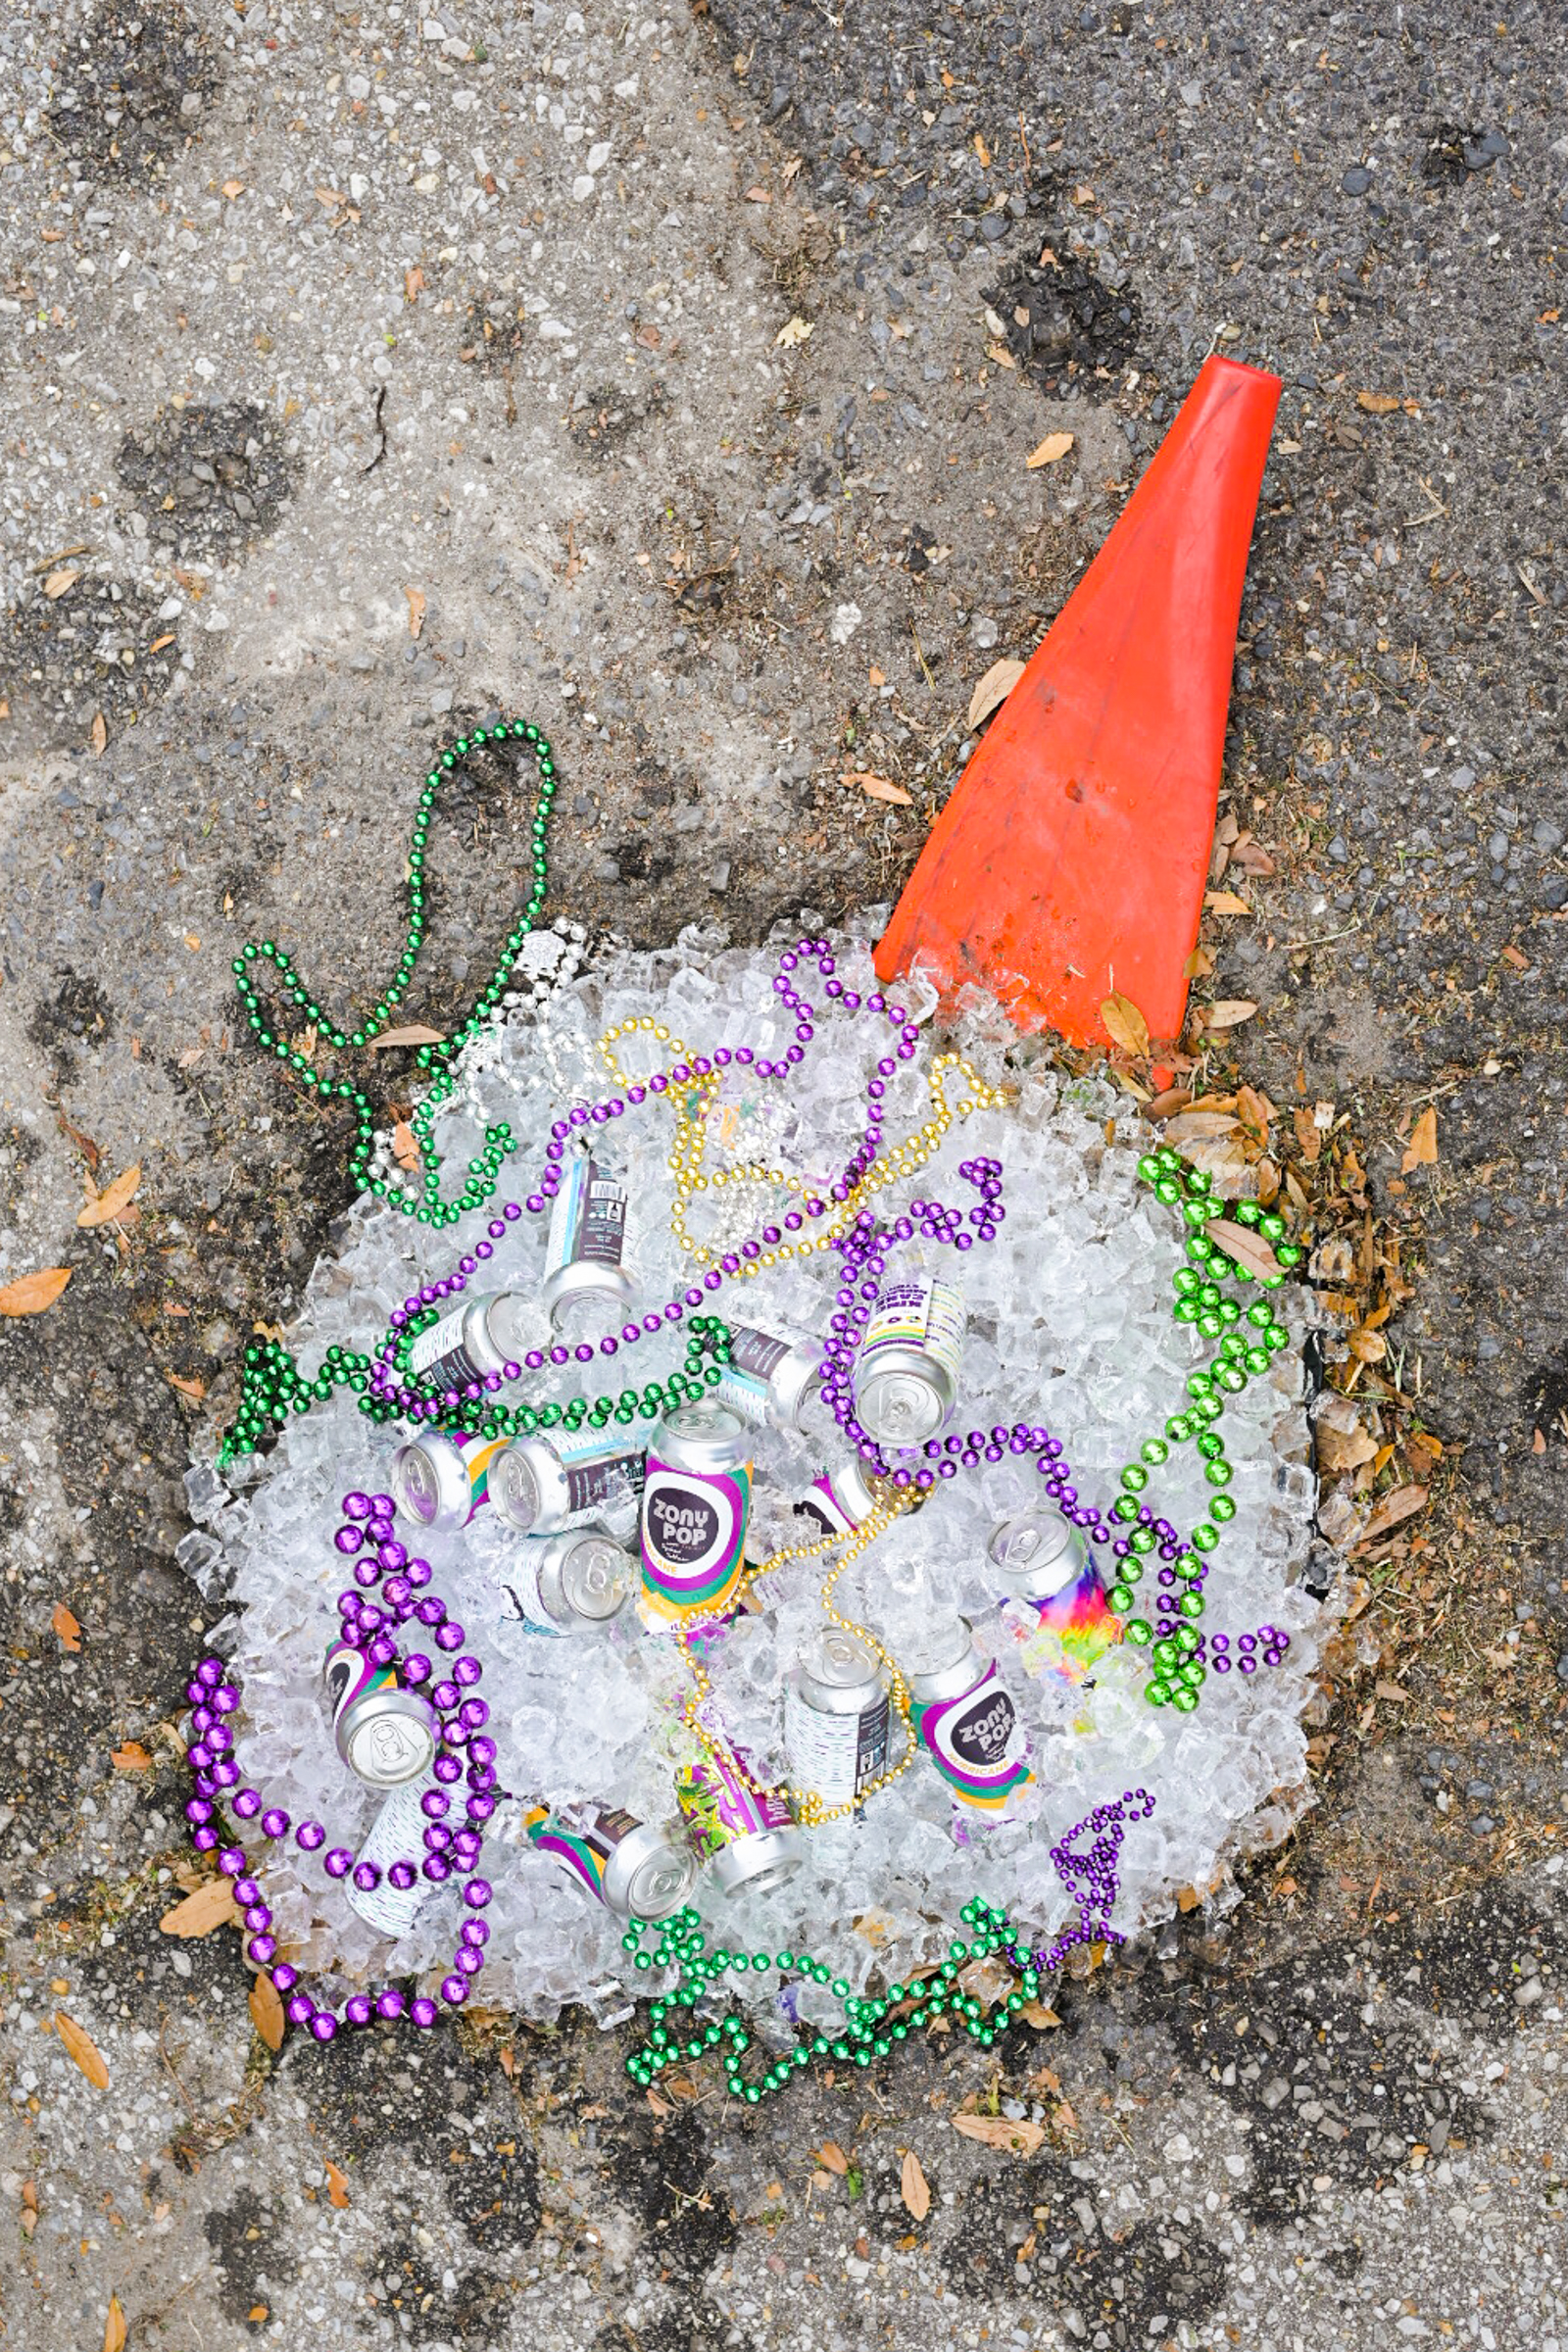 A New Orleans pothole filled with ice, beer, and Mardi Gras beads